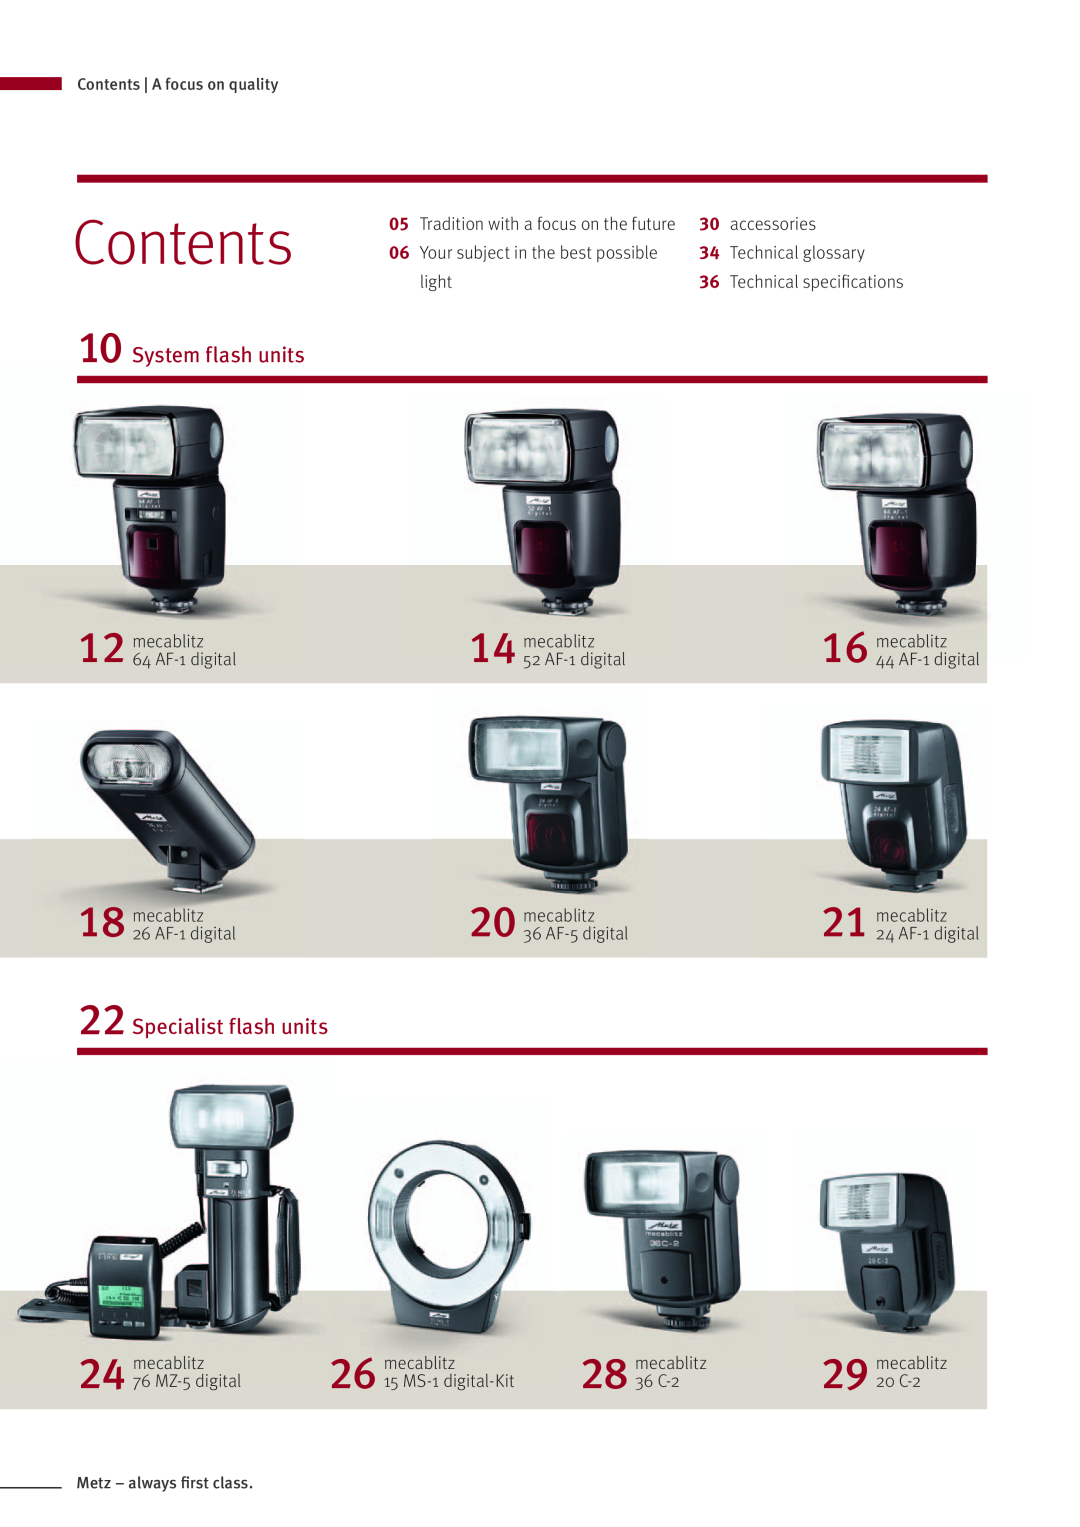 Metz MZ 44314N Contents, System flash units, Specialist flash units, Tradition with a focus on the future, accessories 